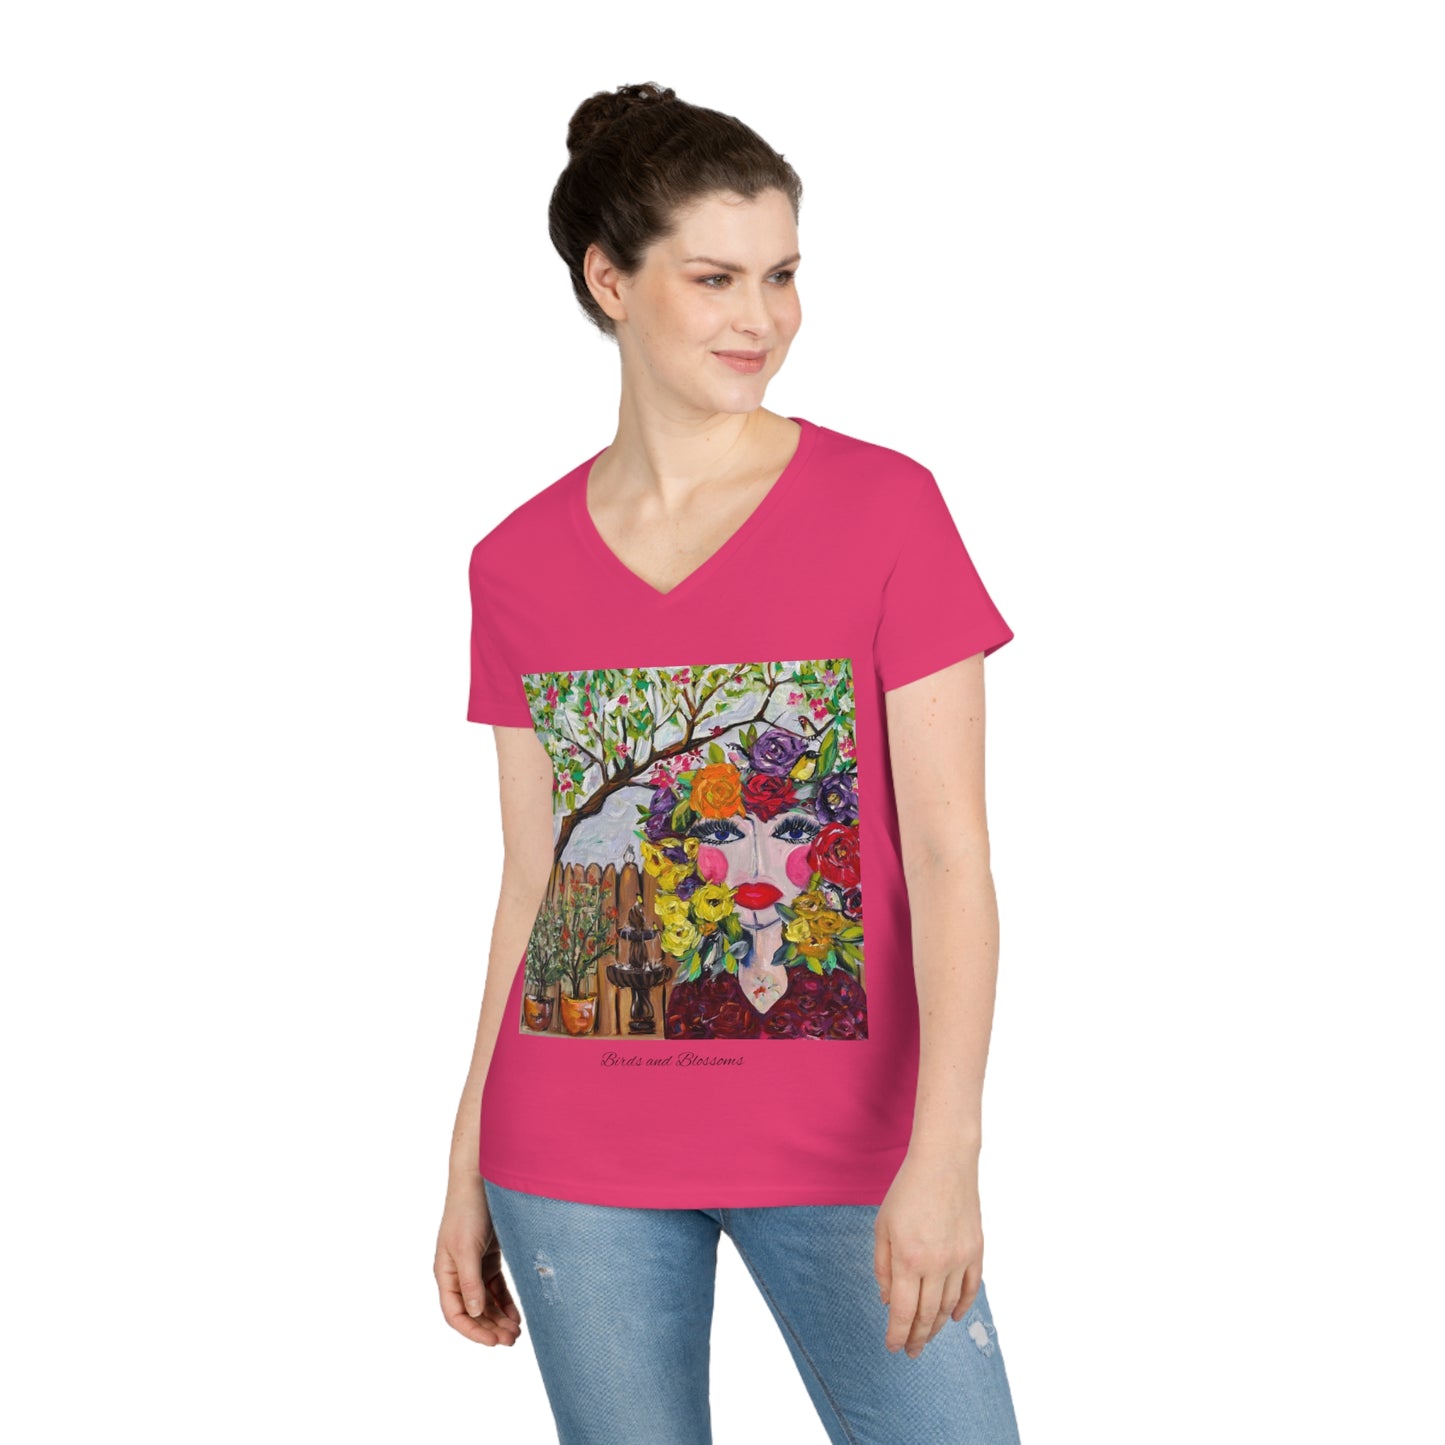 Birds and Blossoms Ladies' V-Neck T-Shirt